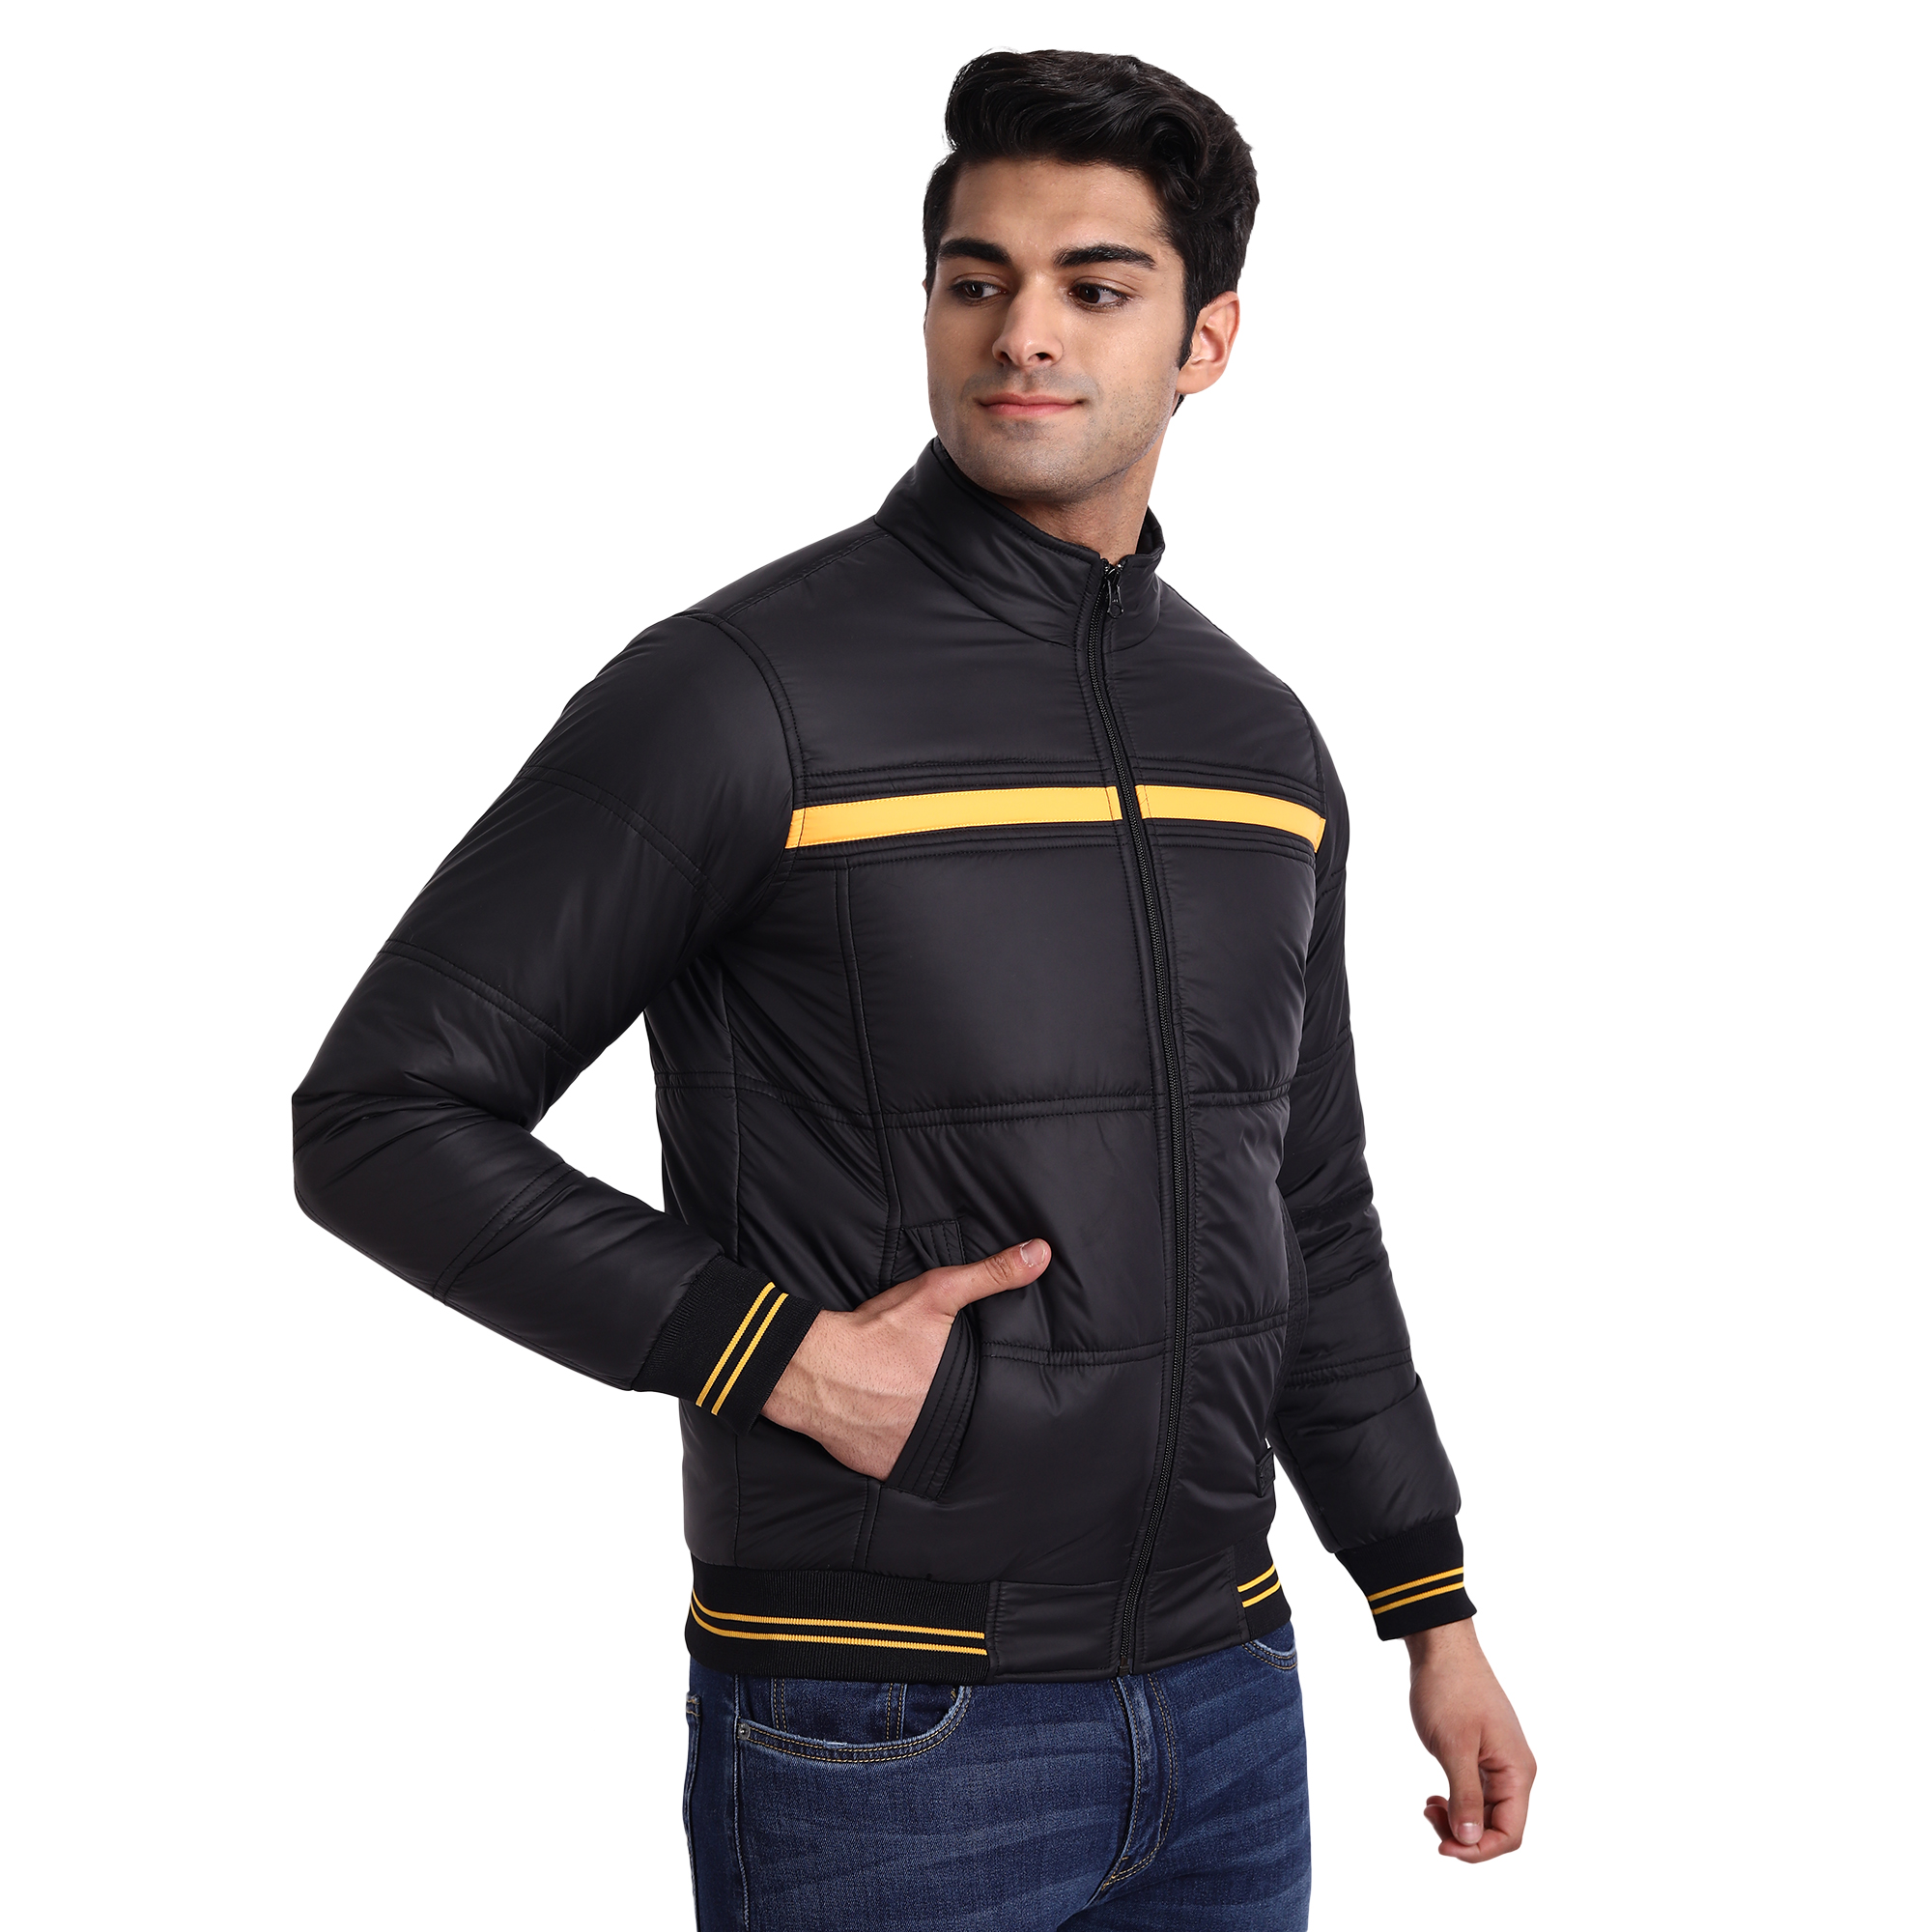 JCB Jacket- FS – Welcome to the JCB merchandise shop India website